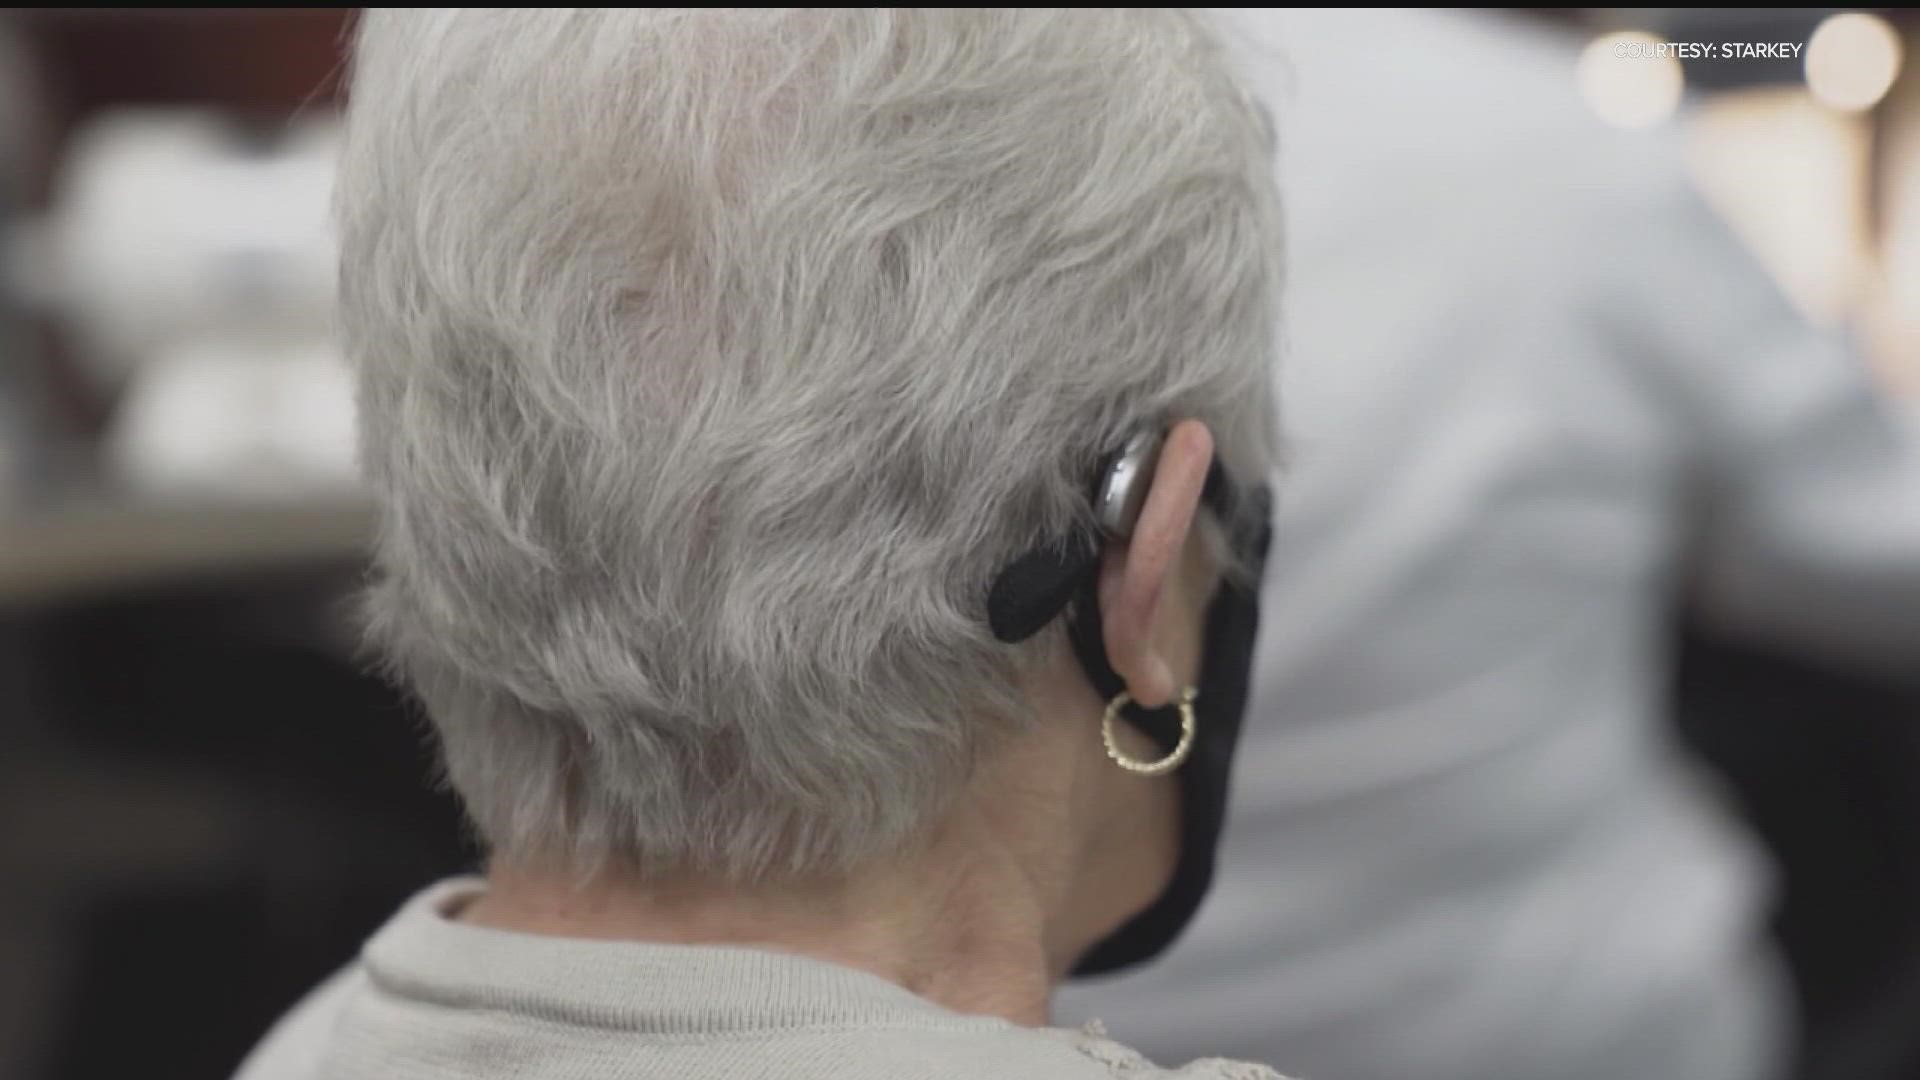 Advocates predict the hearing aid market will eventually resemble eye care, where consumers can choose between drugstore reading glasses or prescription bifocals.